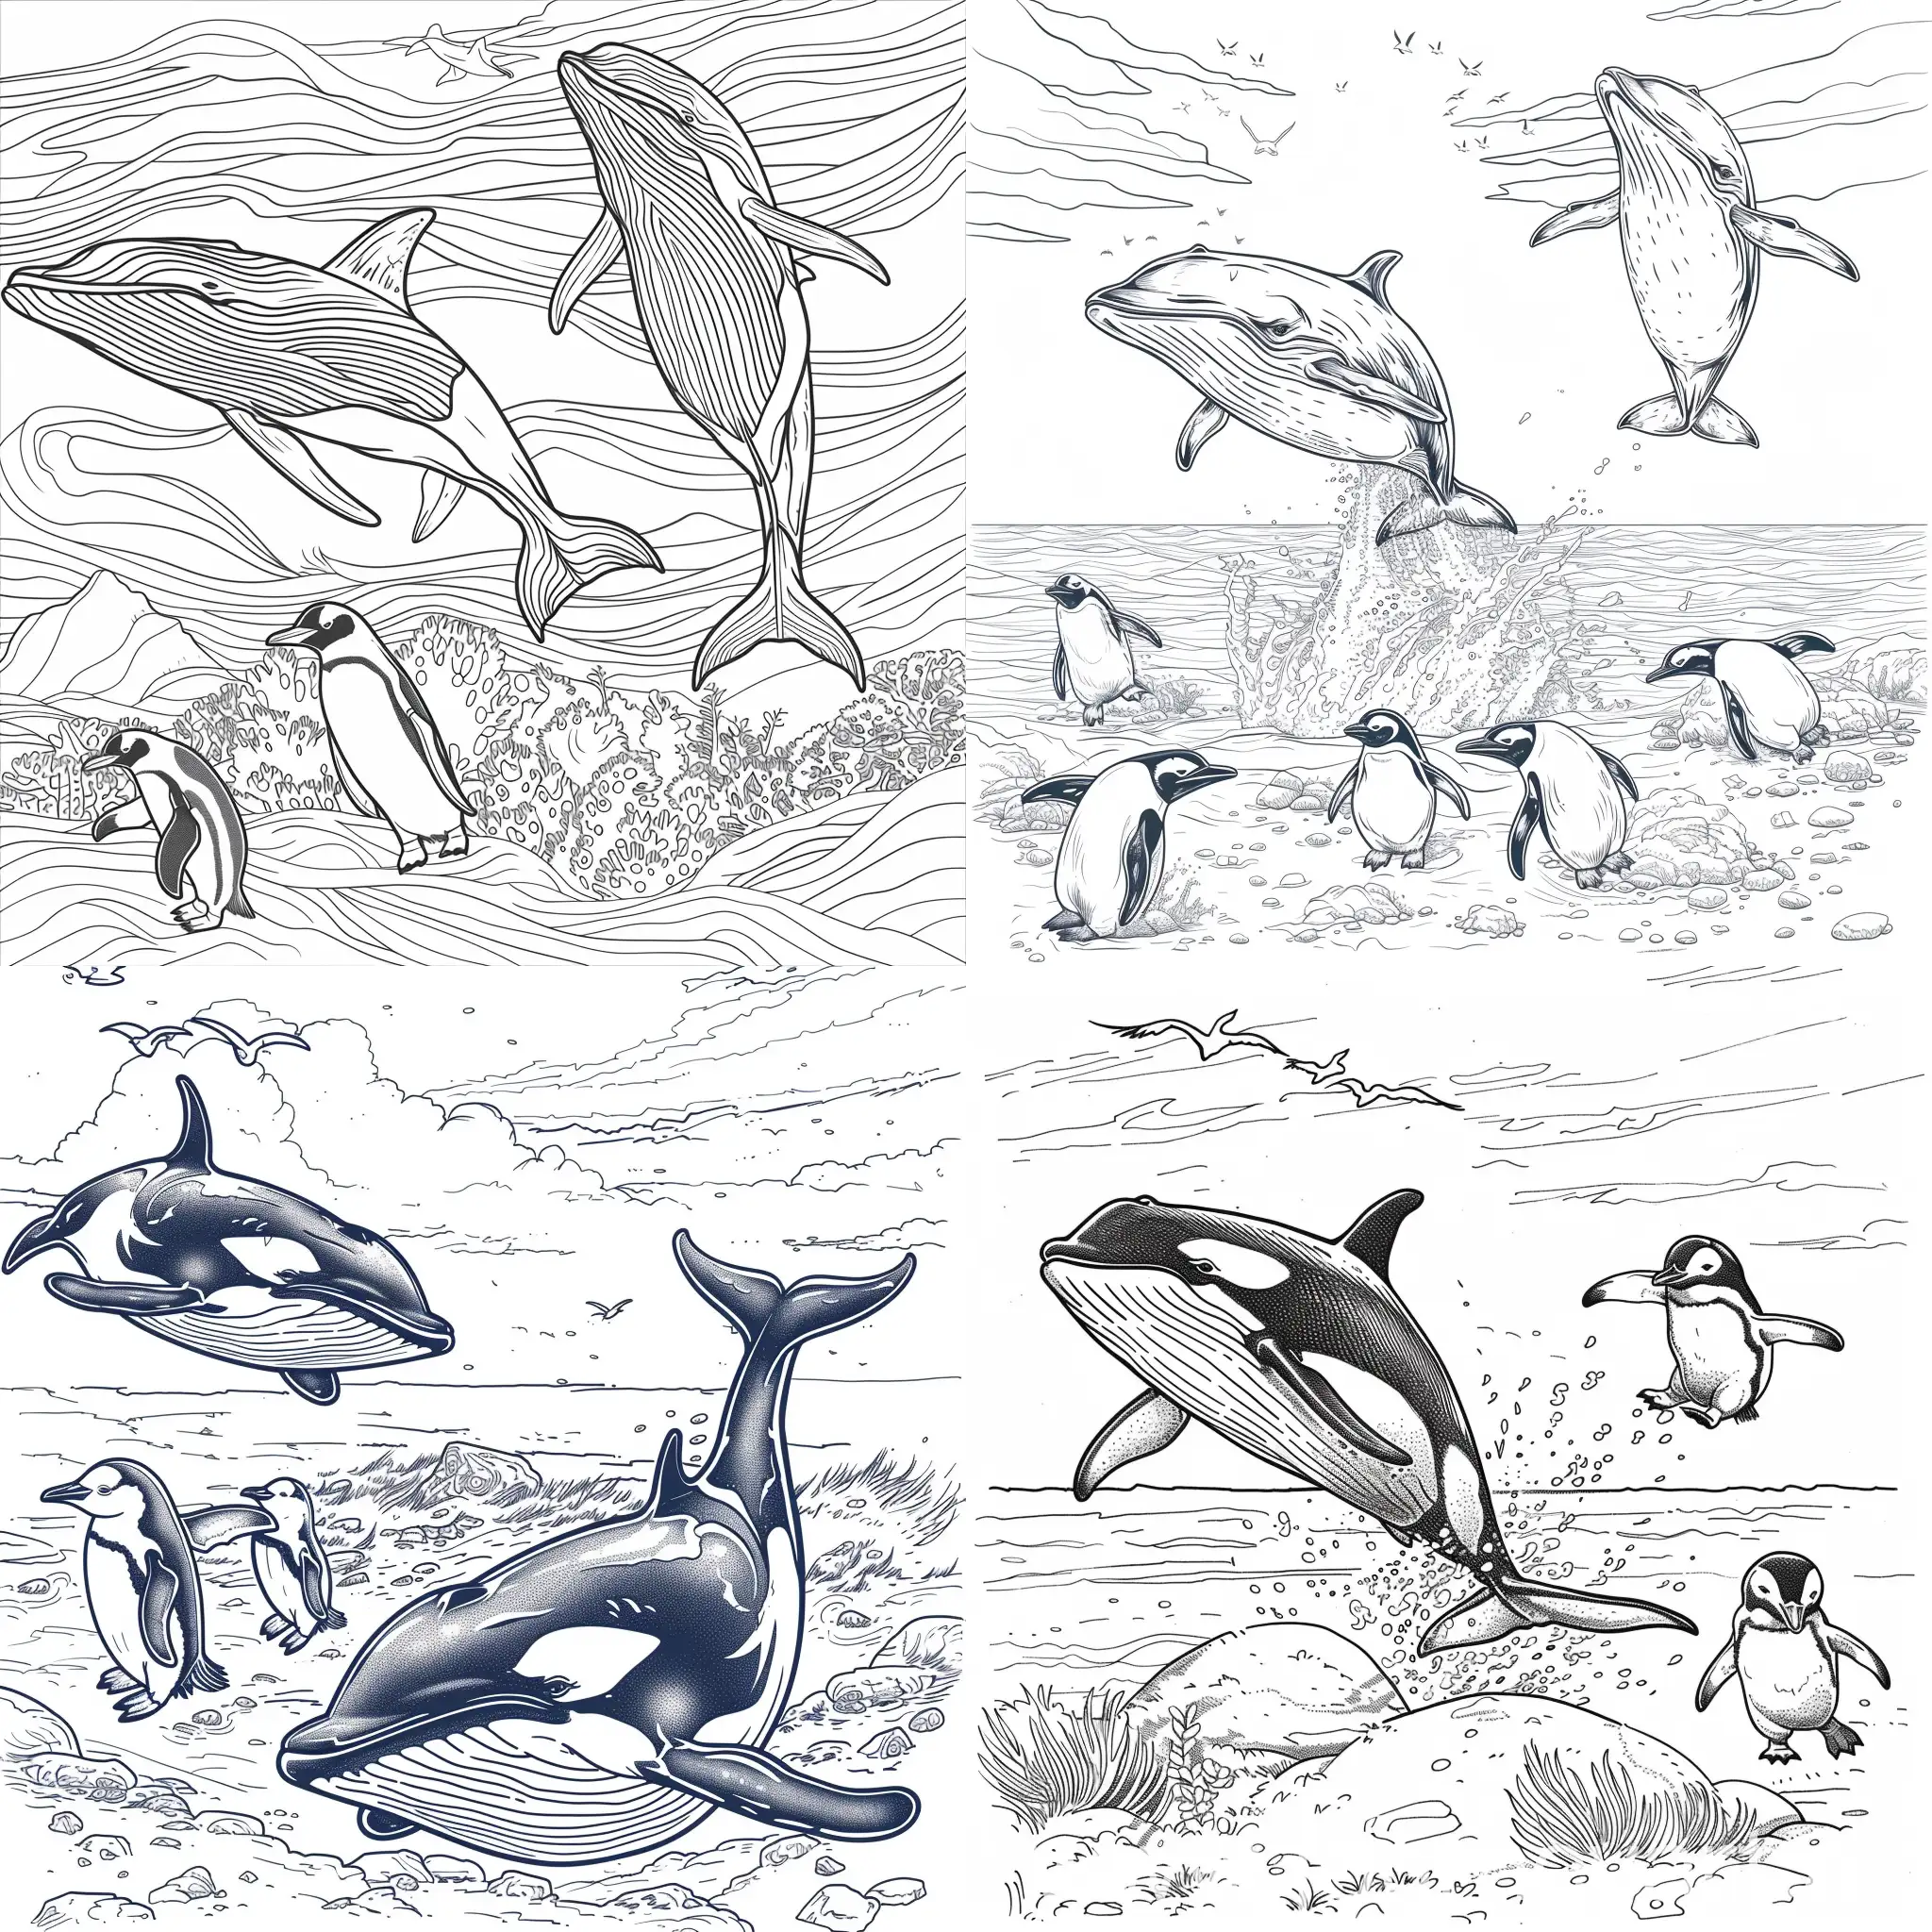 coloring page for kids, detailed, simply cartoon style, isolated, funny, killer whales and penguins